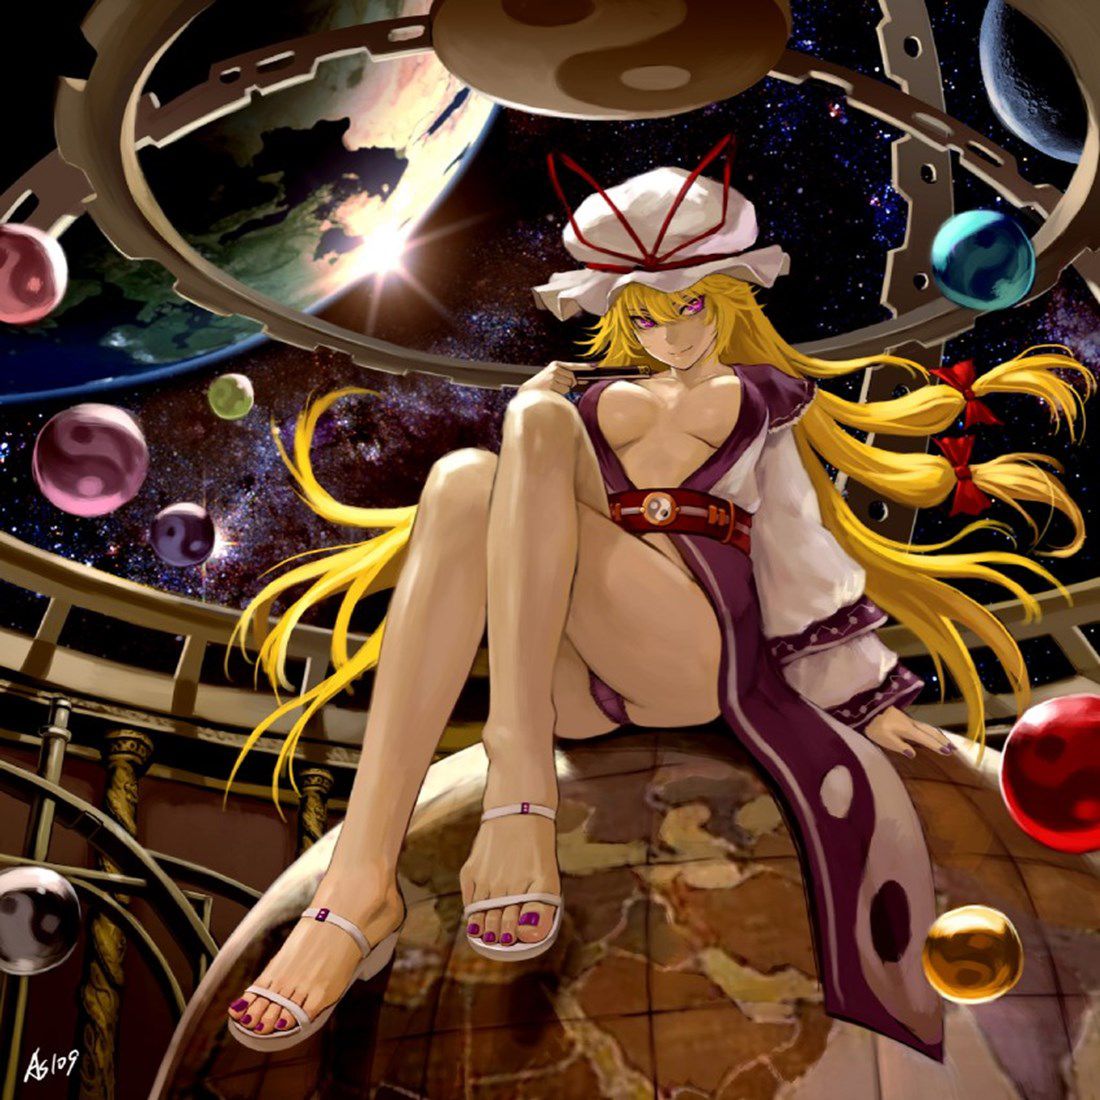 [Secondary] Touhou image thread 7 5